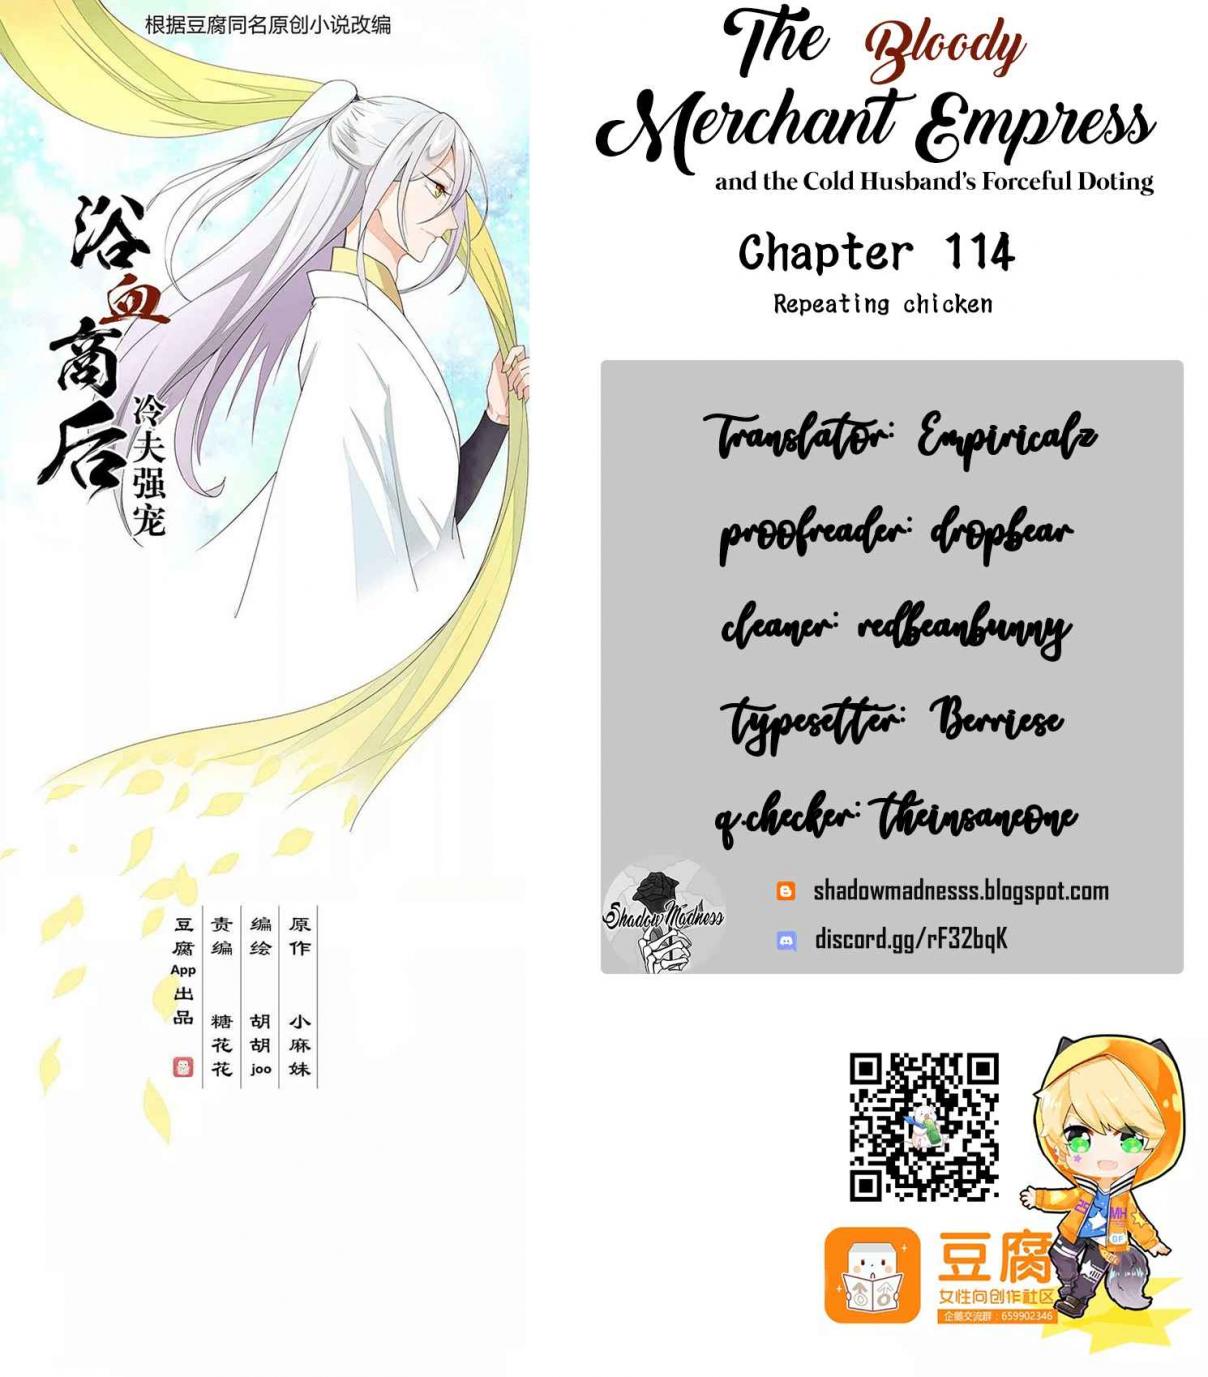 The Bloody Merchant Empress and the Cold Husband's Forceful Doting Ch. 114 Repeating chicken